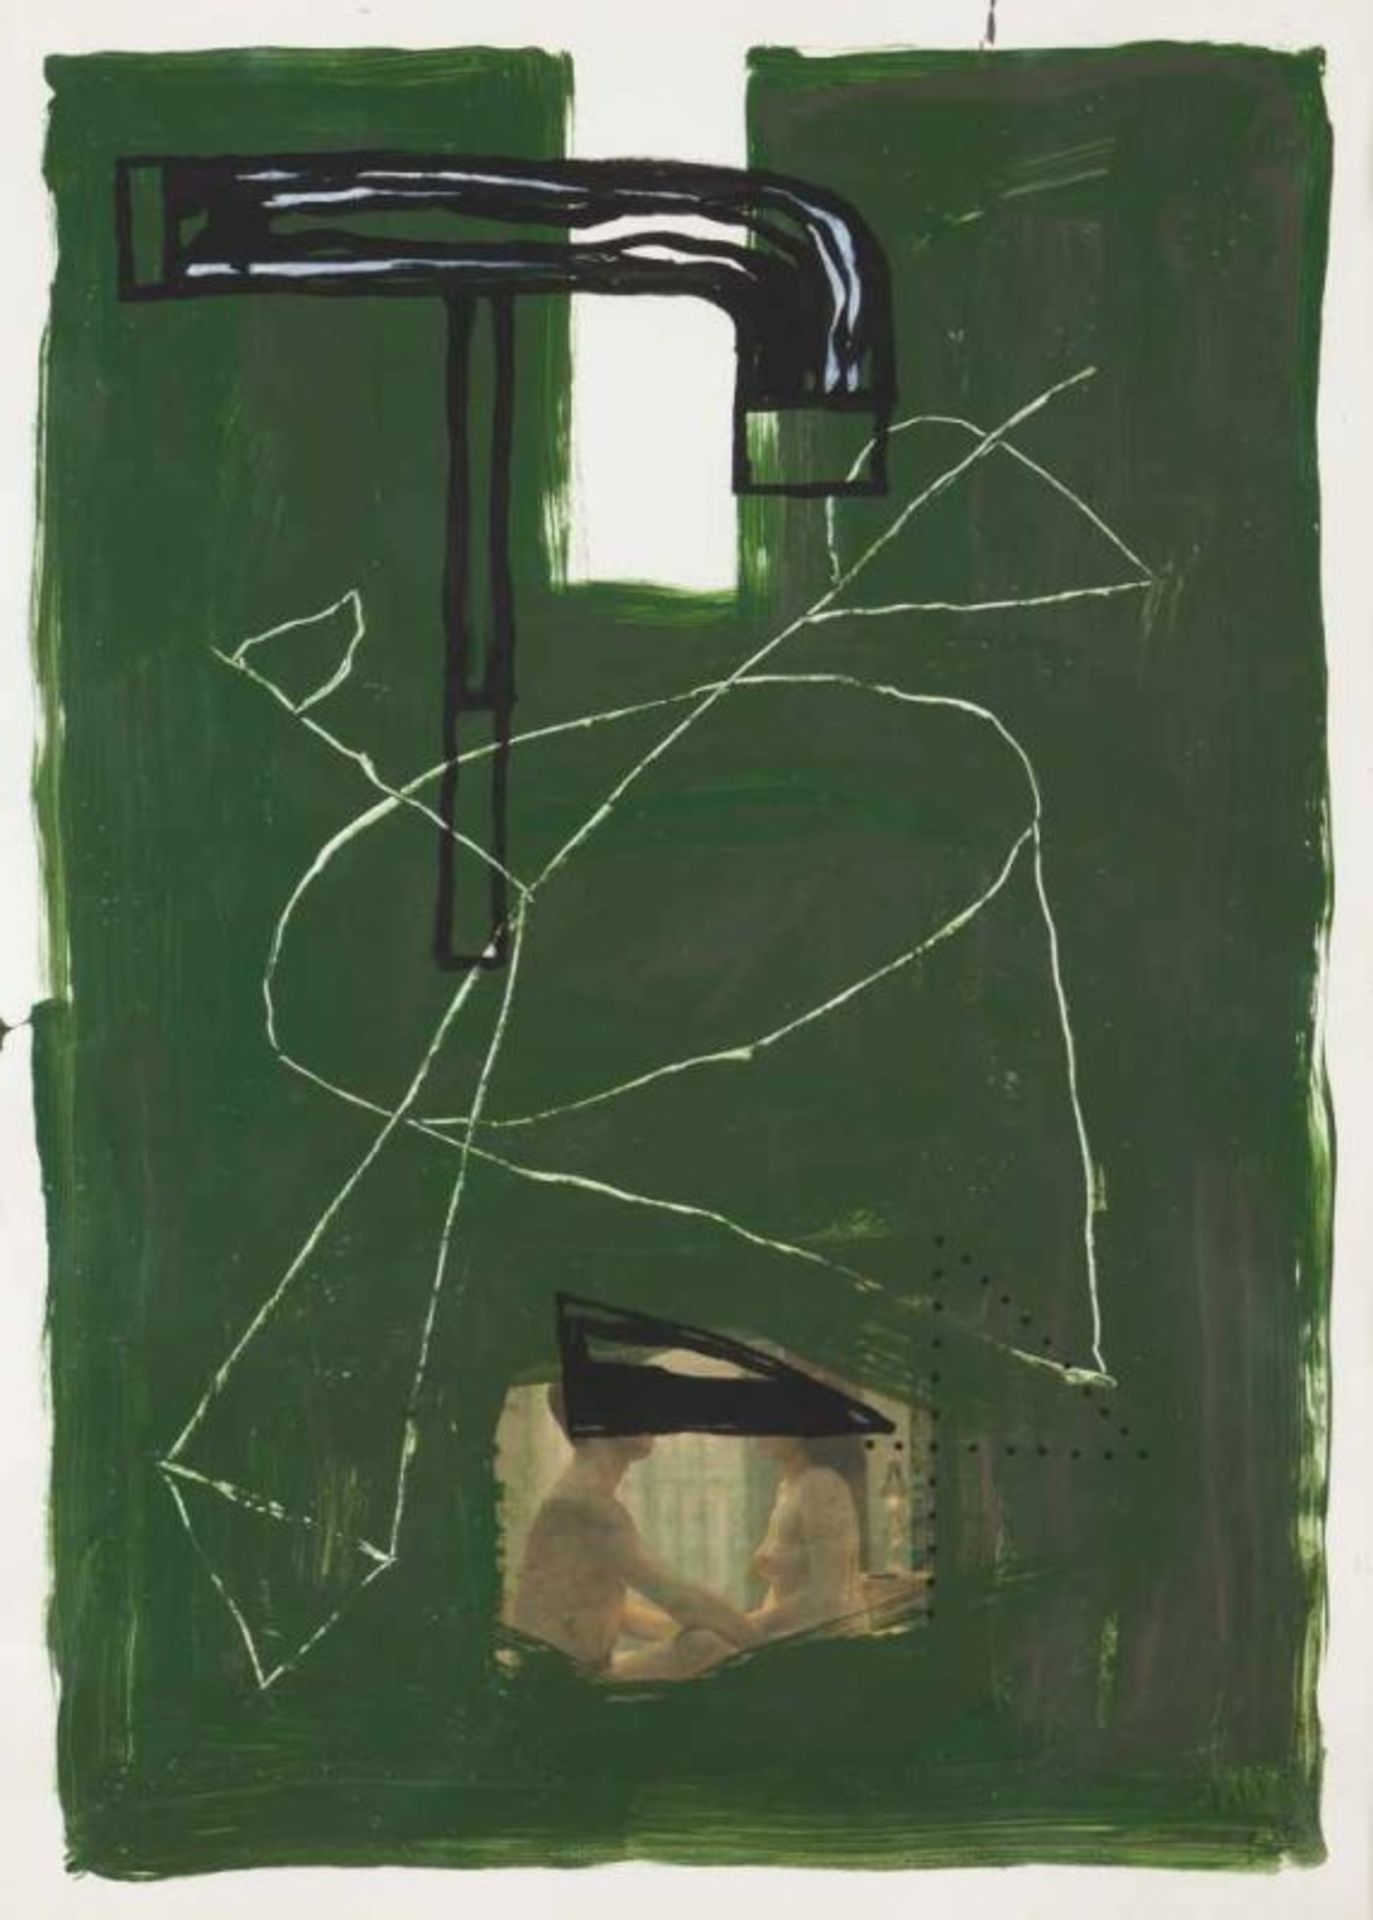 Julião Sarmento (n. 1948)"Desenho" (#495)Vinyl tempera, acrylic, graphite and college on paperSigned